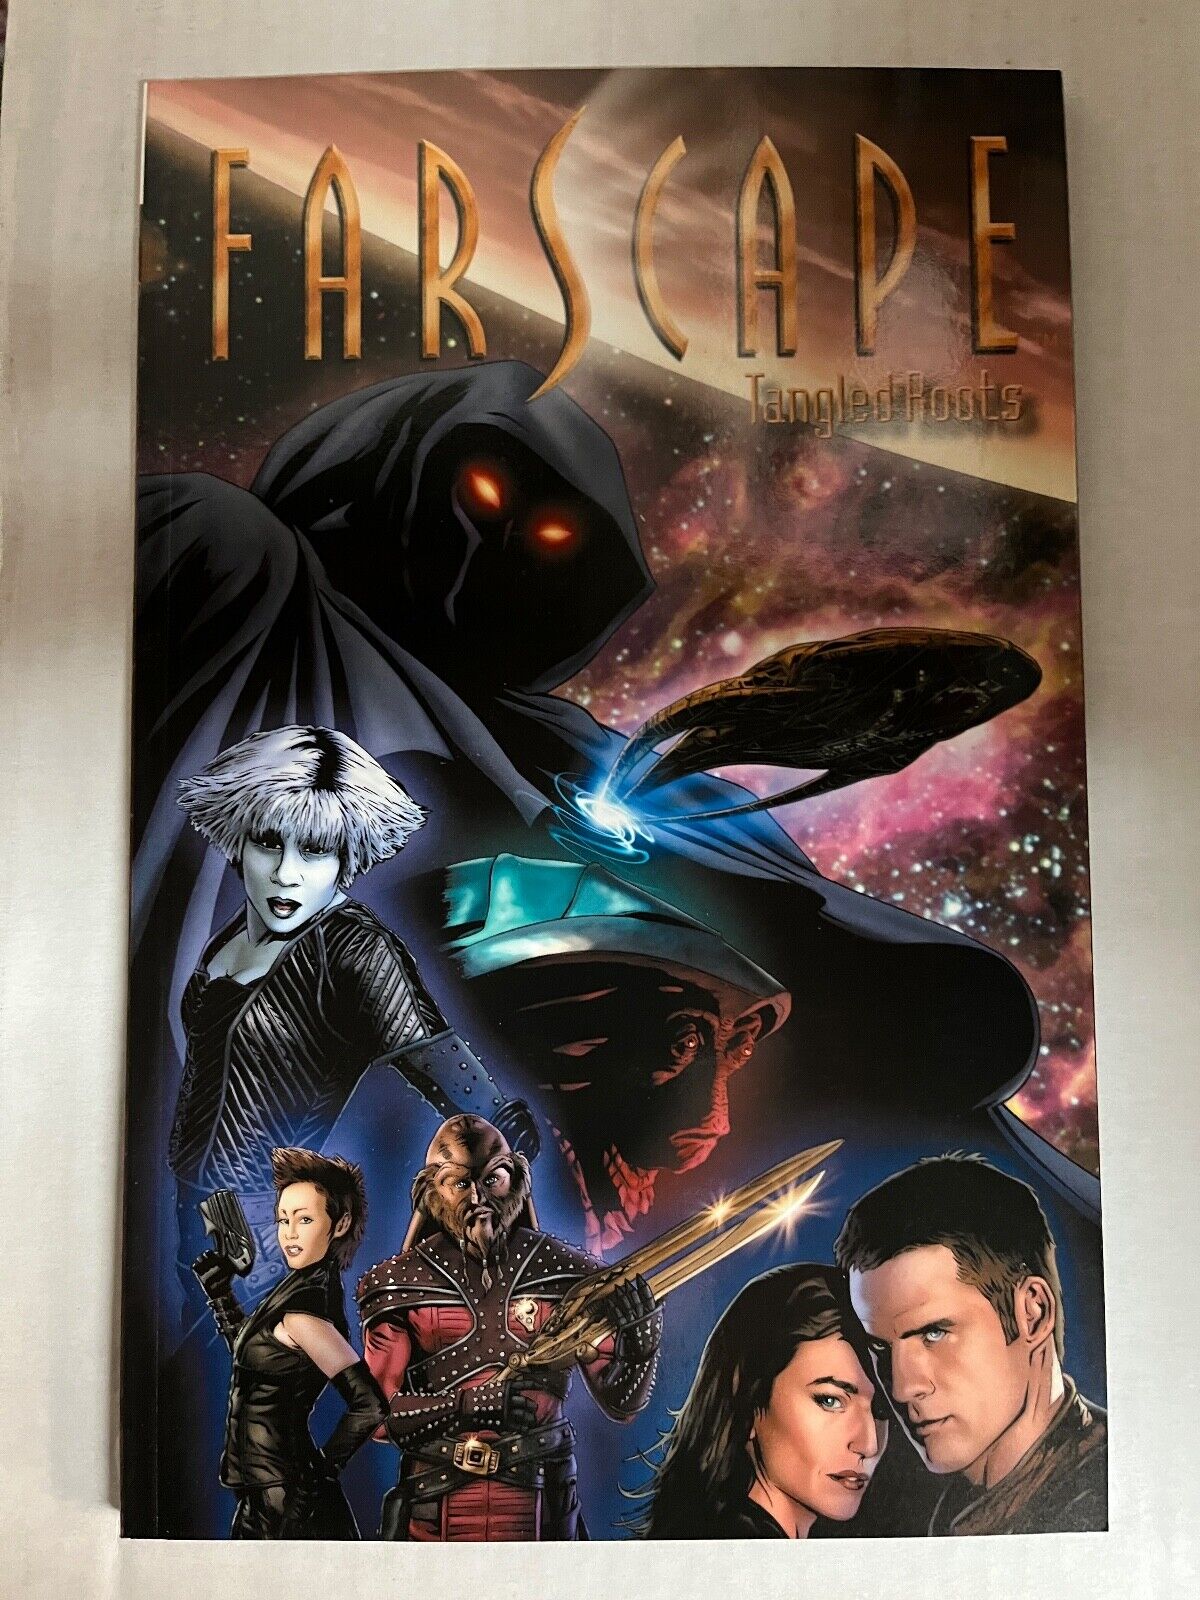 BOOM: FARSCAPE: VOLUME 4: TANGLED ROOTS: TRADE PAPERBACK: BRAND NEW CONDITION